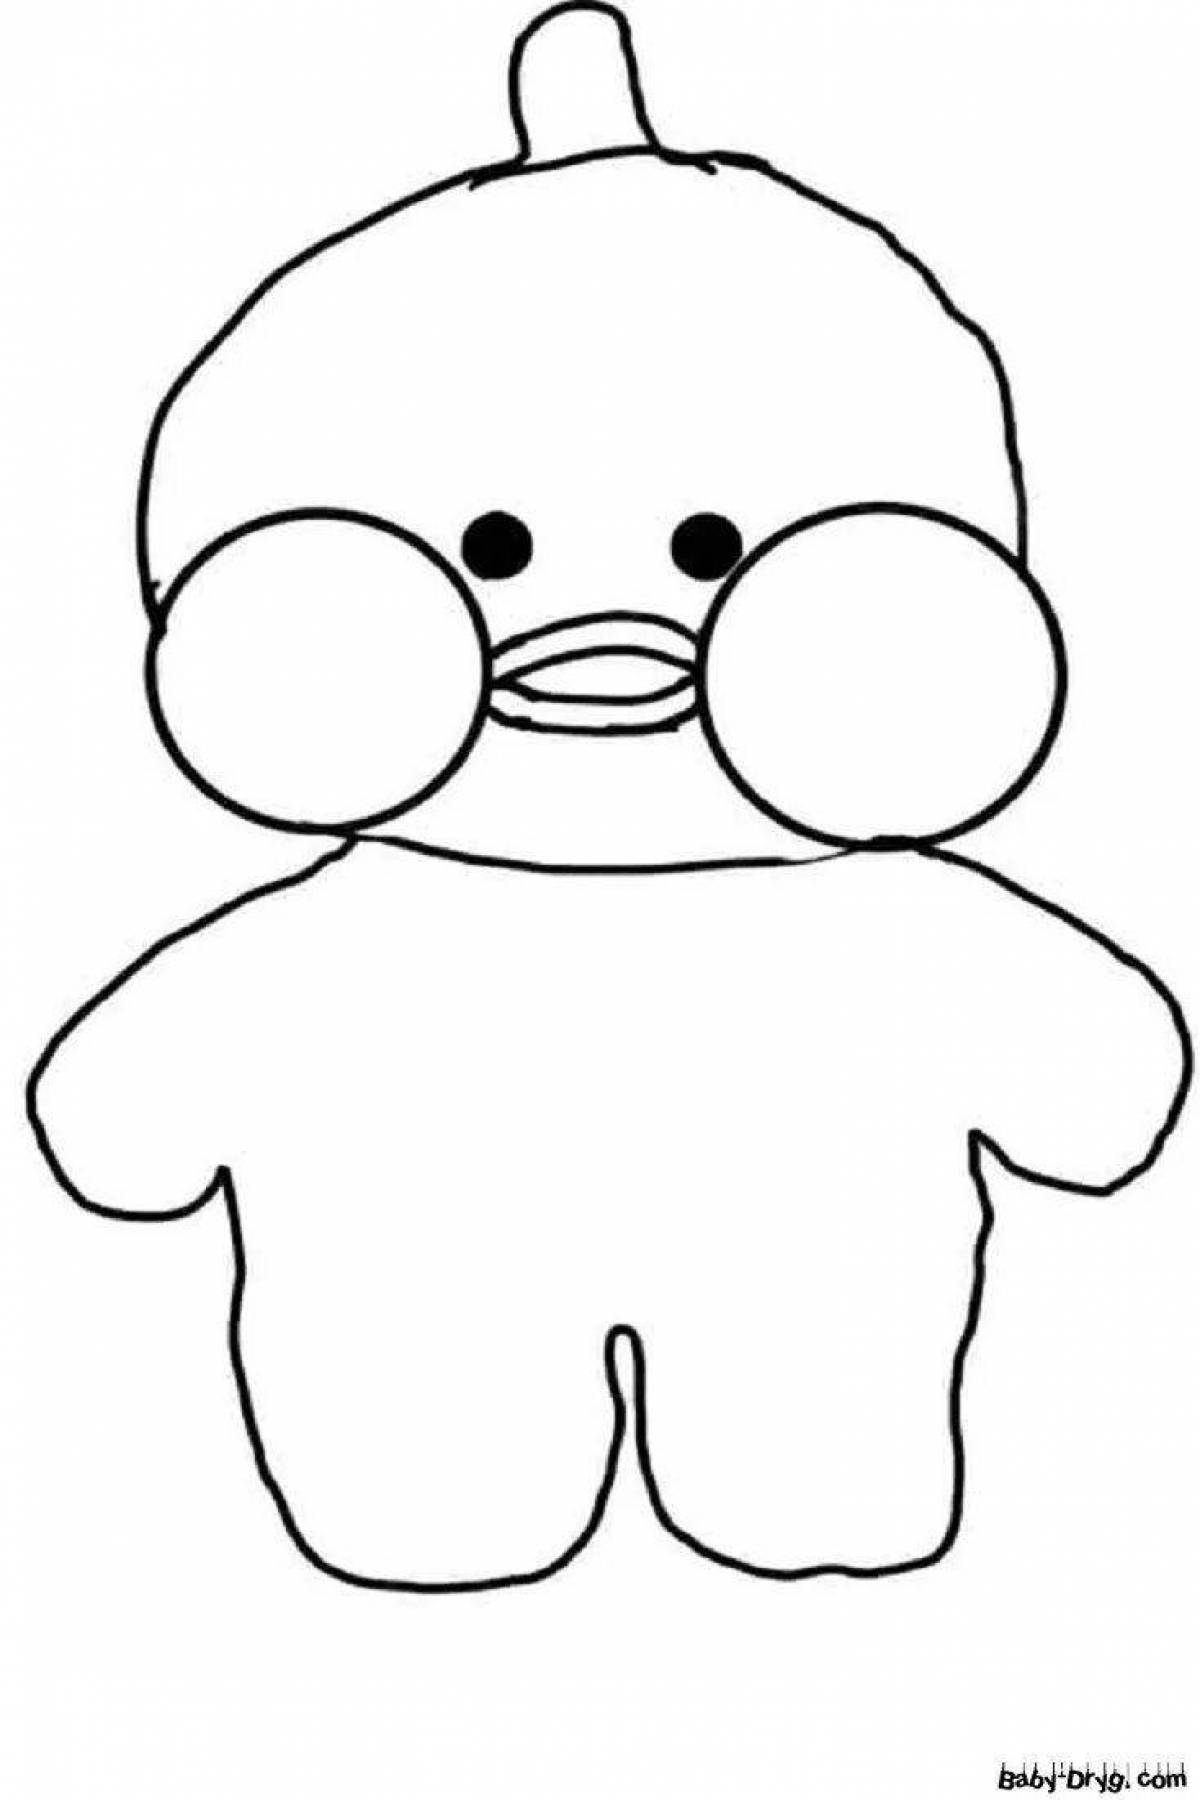 Great lolofan duck coloring page